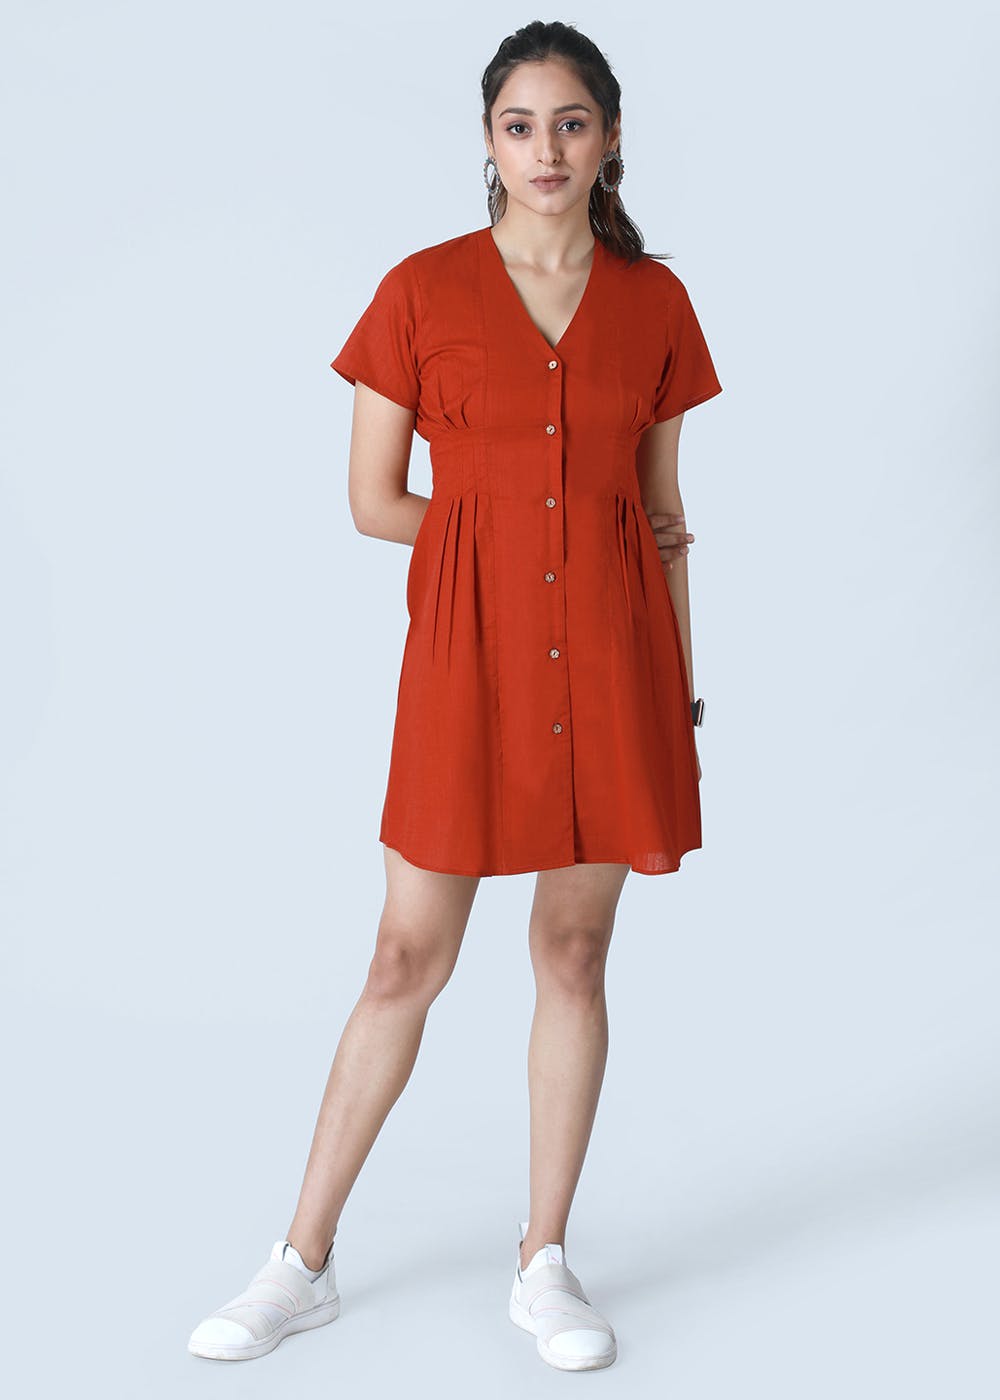 Get Side Pleats Detail Red Button Down Dress at ₹ 1499 | LBB Shop